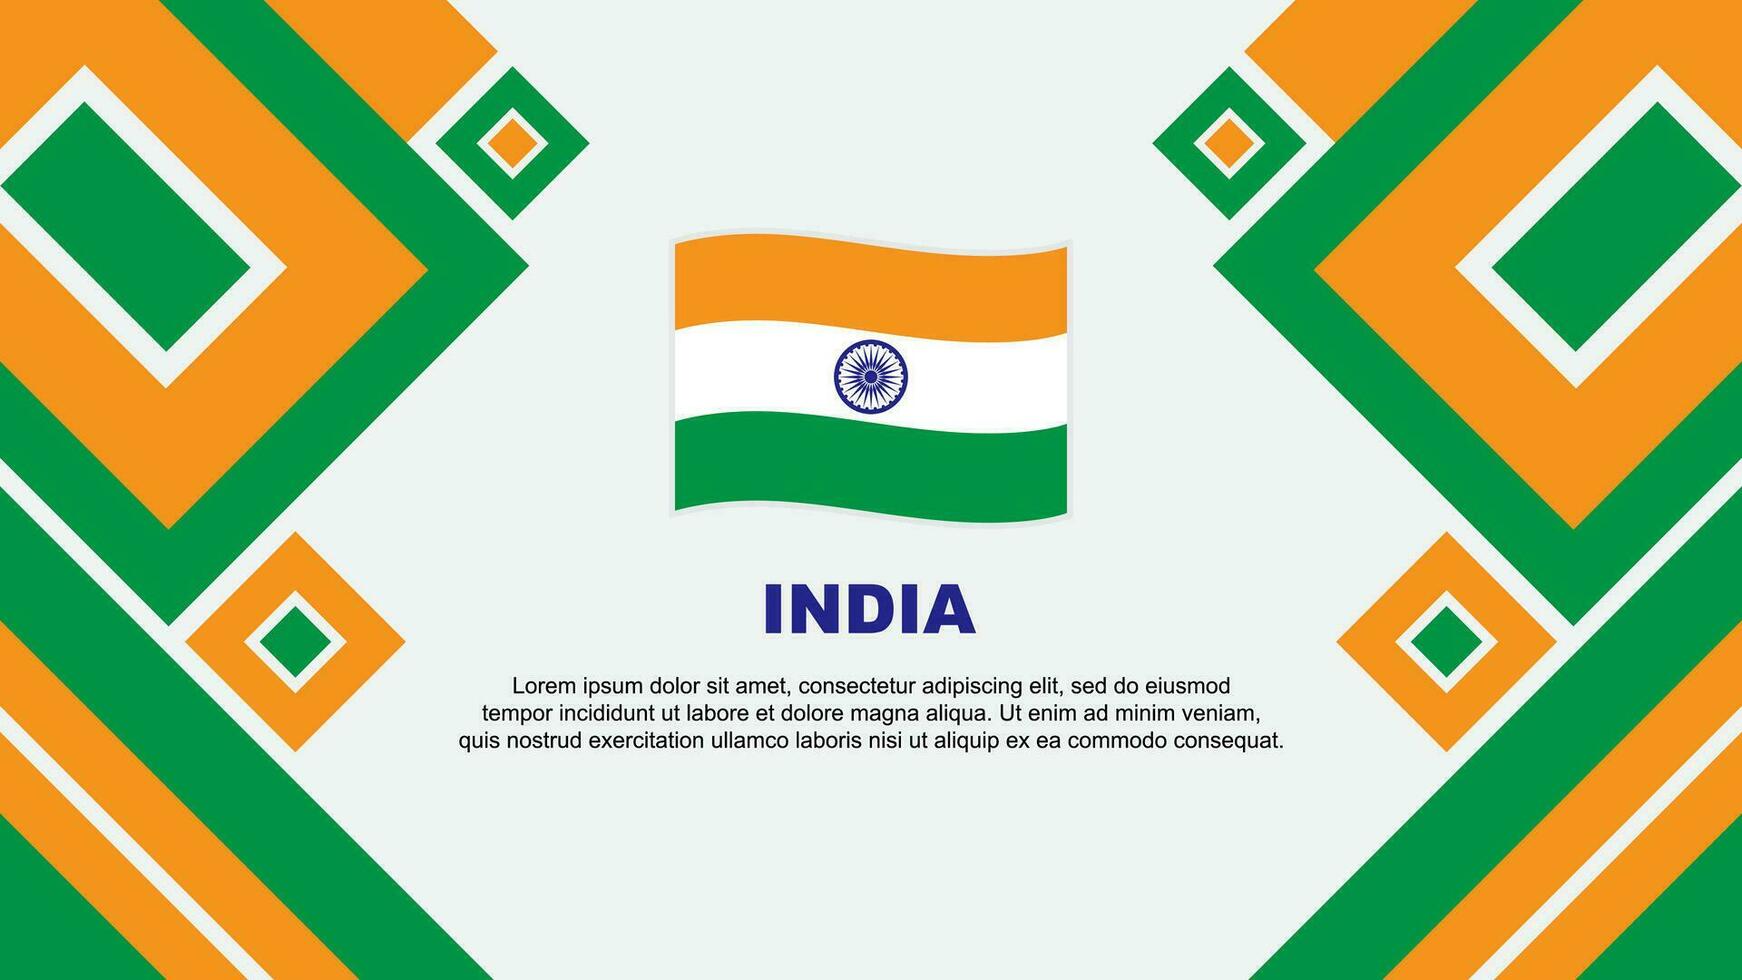 India Flag Abstract Background Design Template. India Independence Day Banner Wallpaper Vector Illustration. India Cartoon